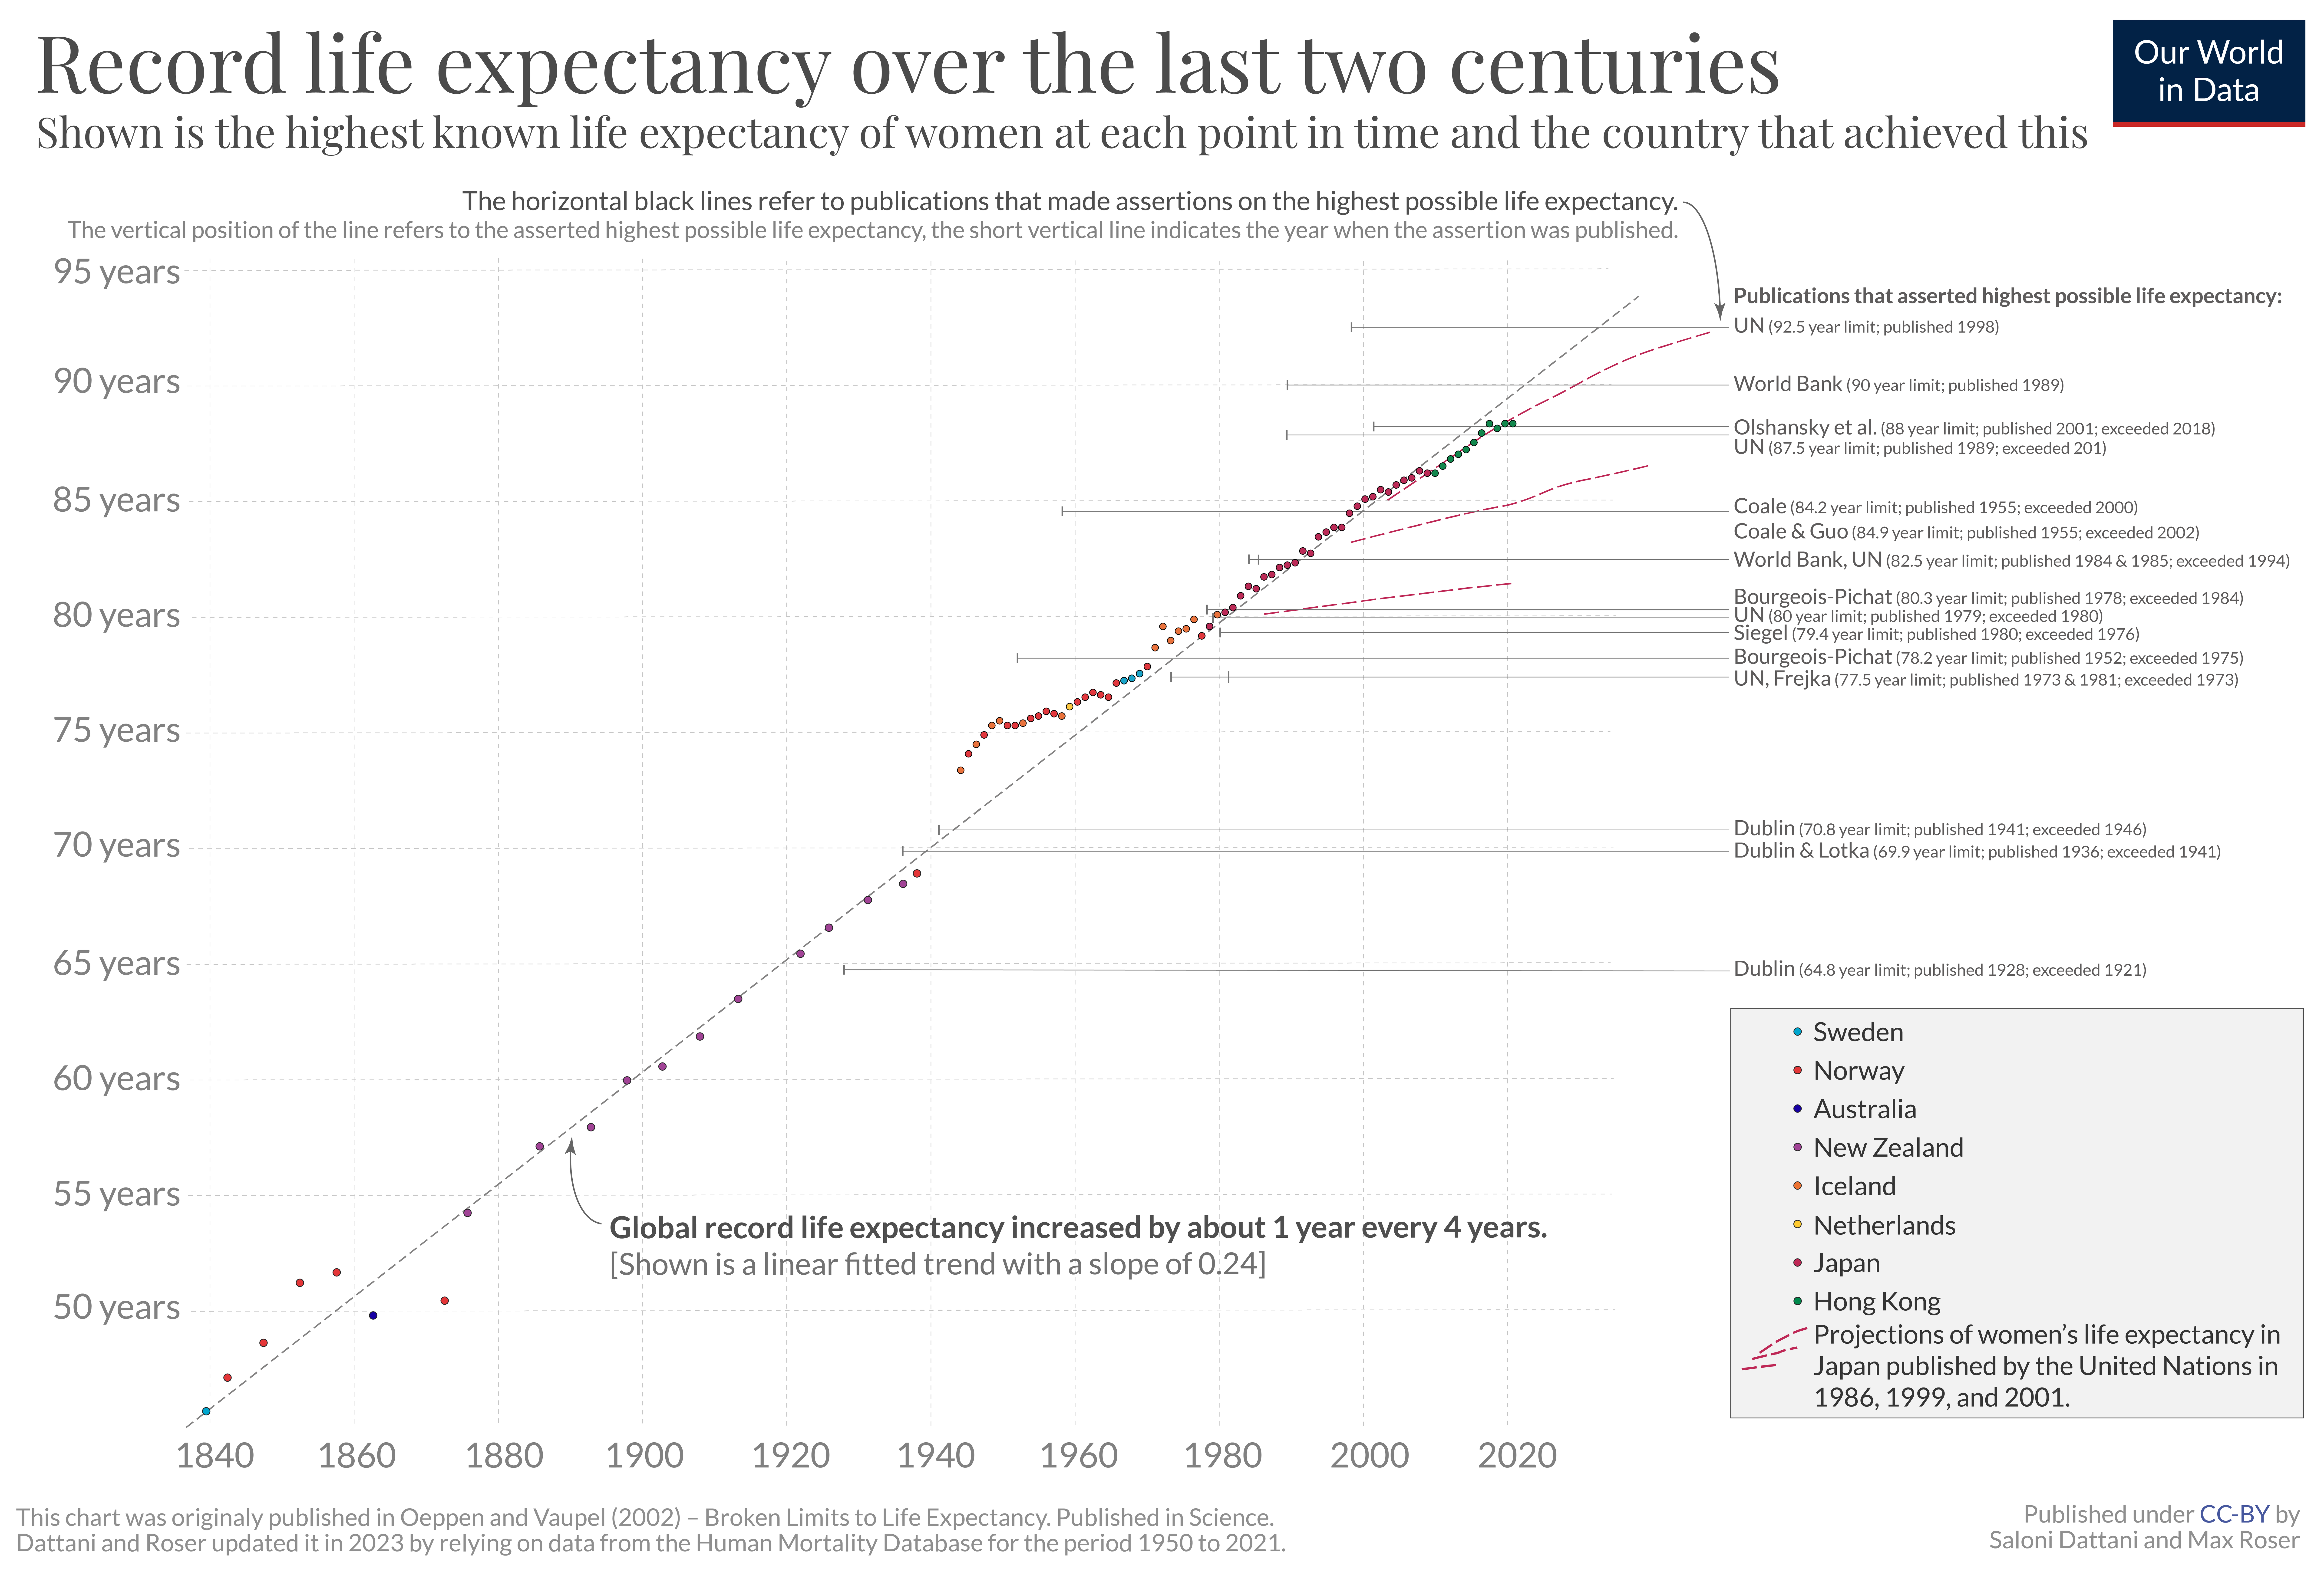 Record life expectancy over the last two centuries - The country with the highest female life expectancy in each year, since 1840. Study originally published by Oeppen and Vaupel 2002 and updated with recent data on Our World in Data.